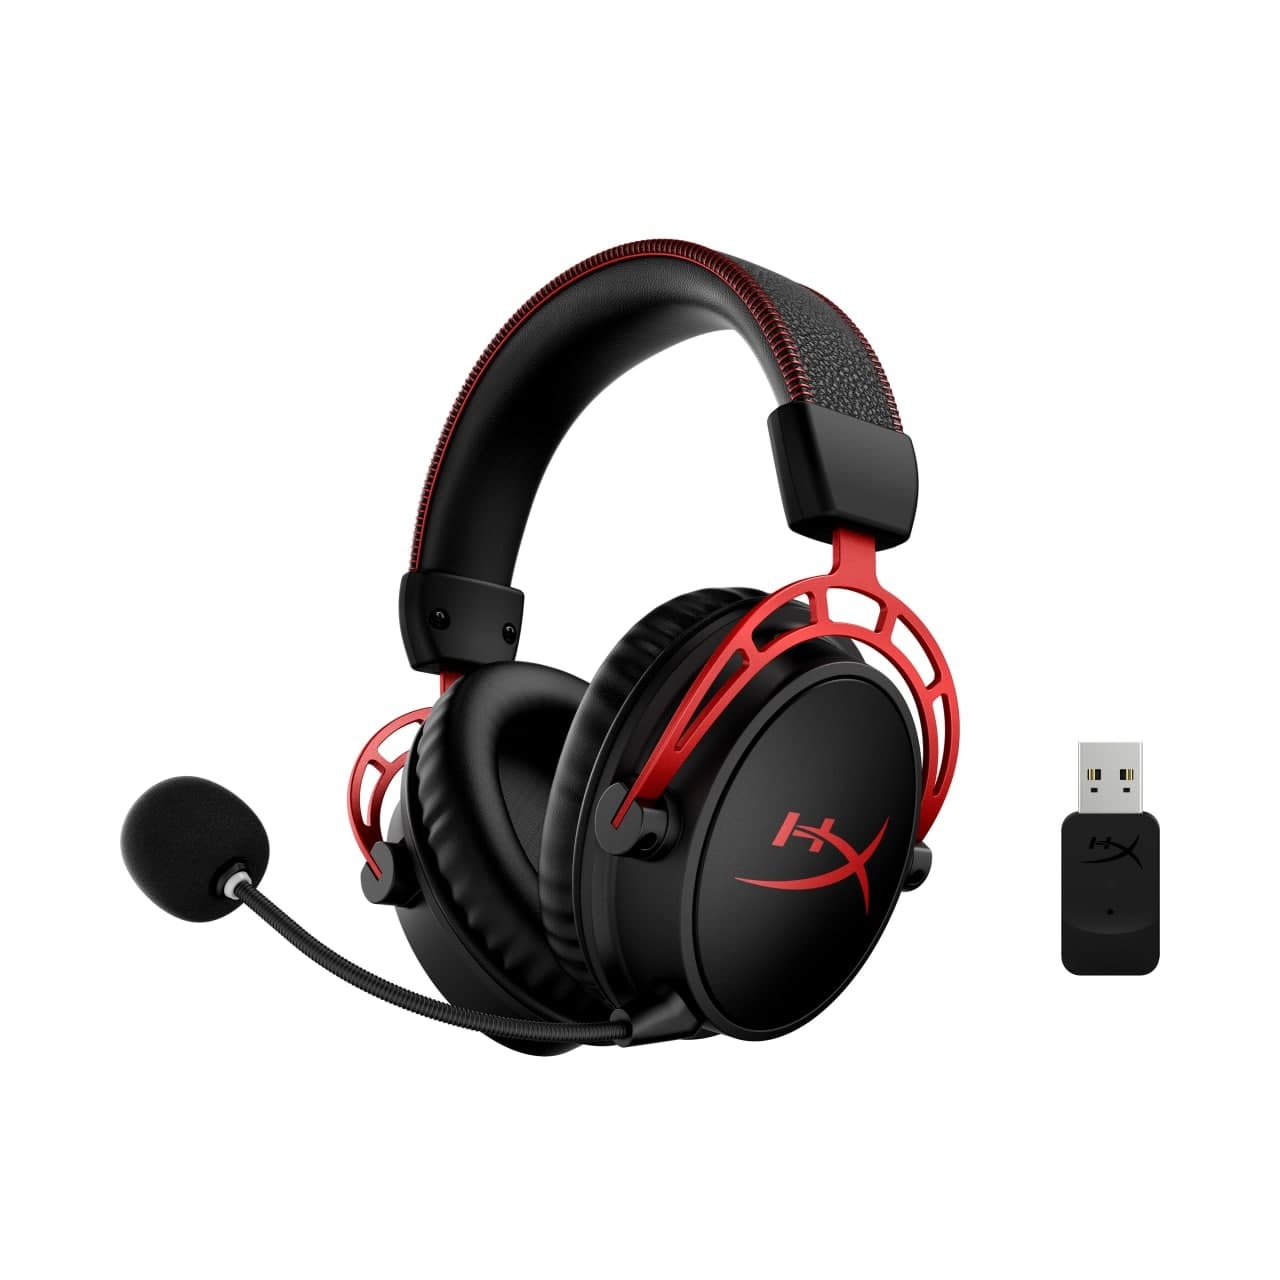 [CES] HyperX unveils 300-hour wireless gaming headset thumbnail